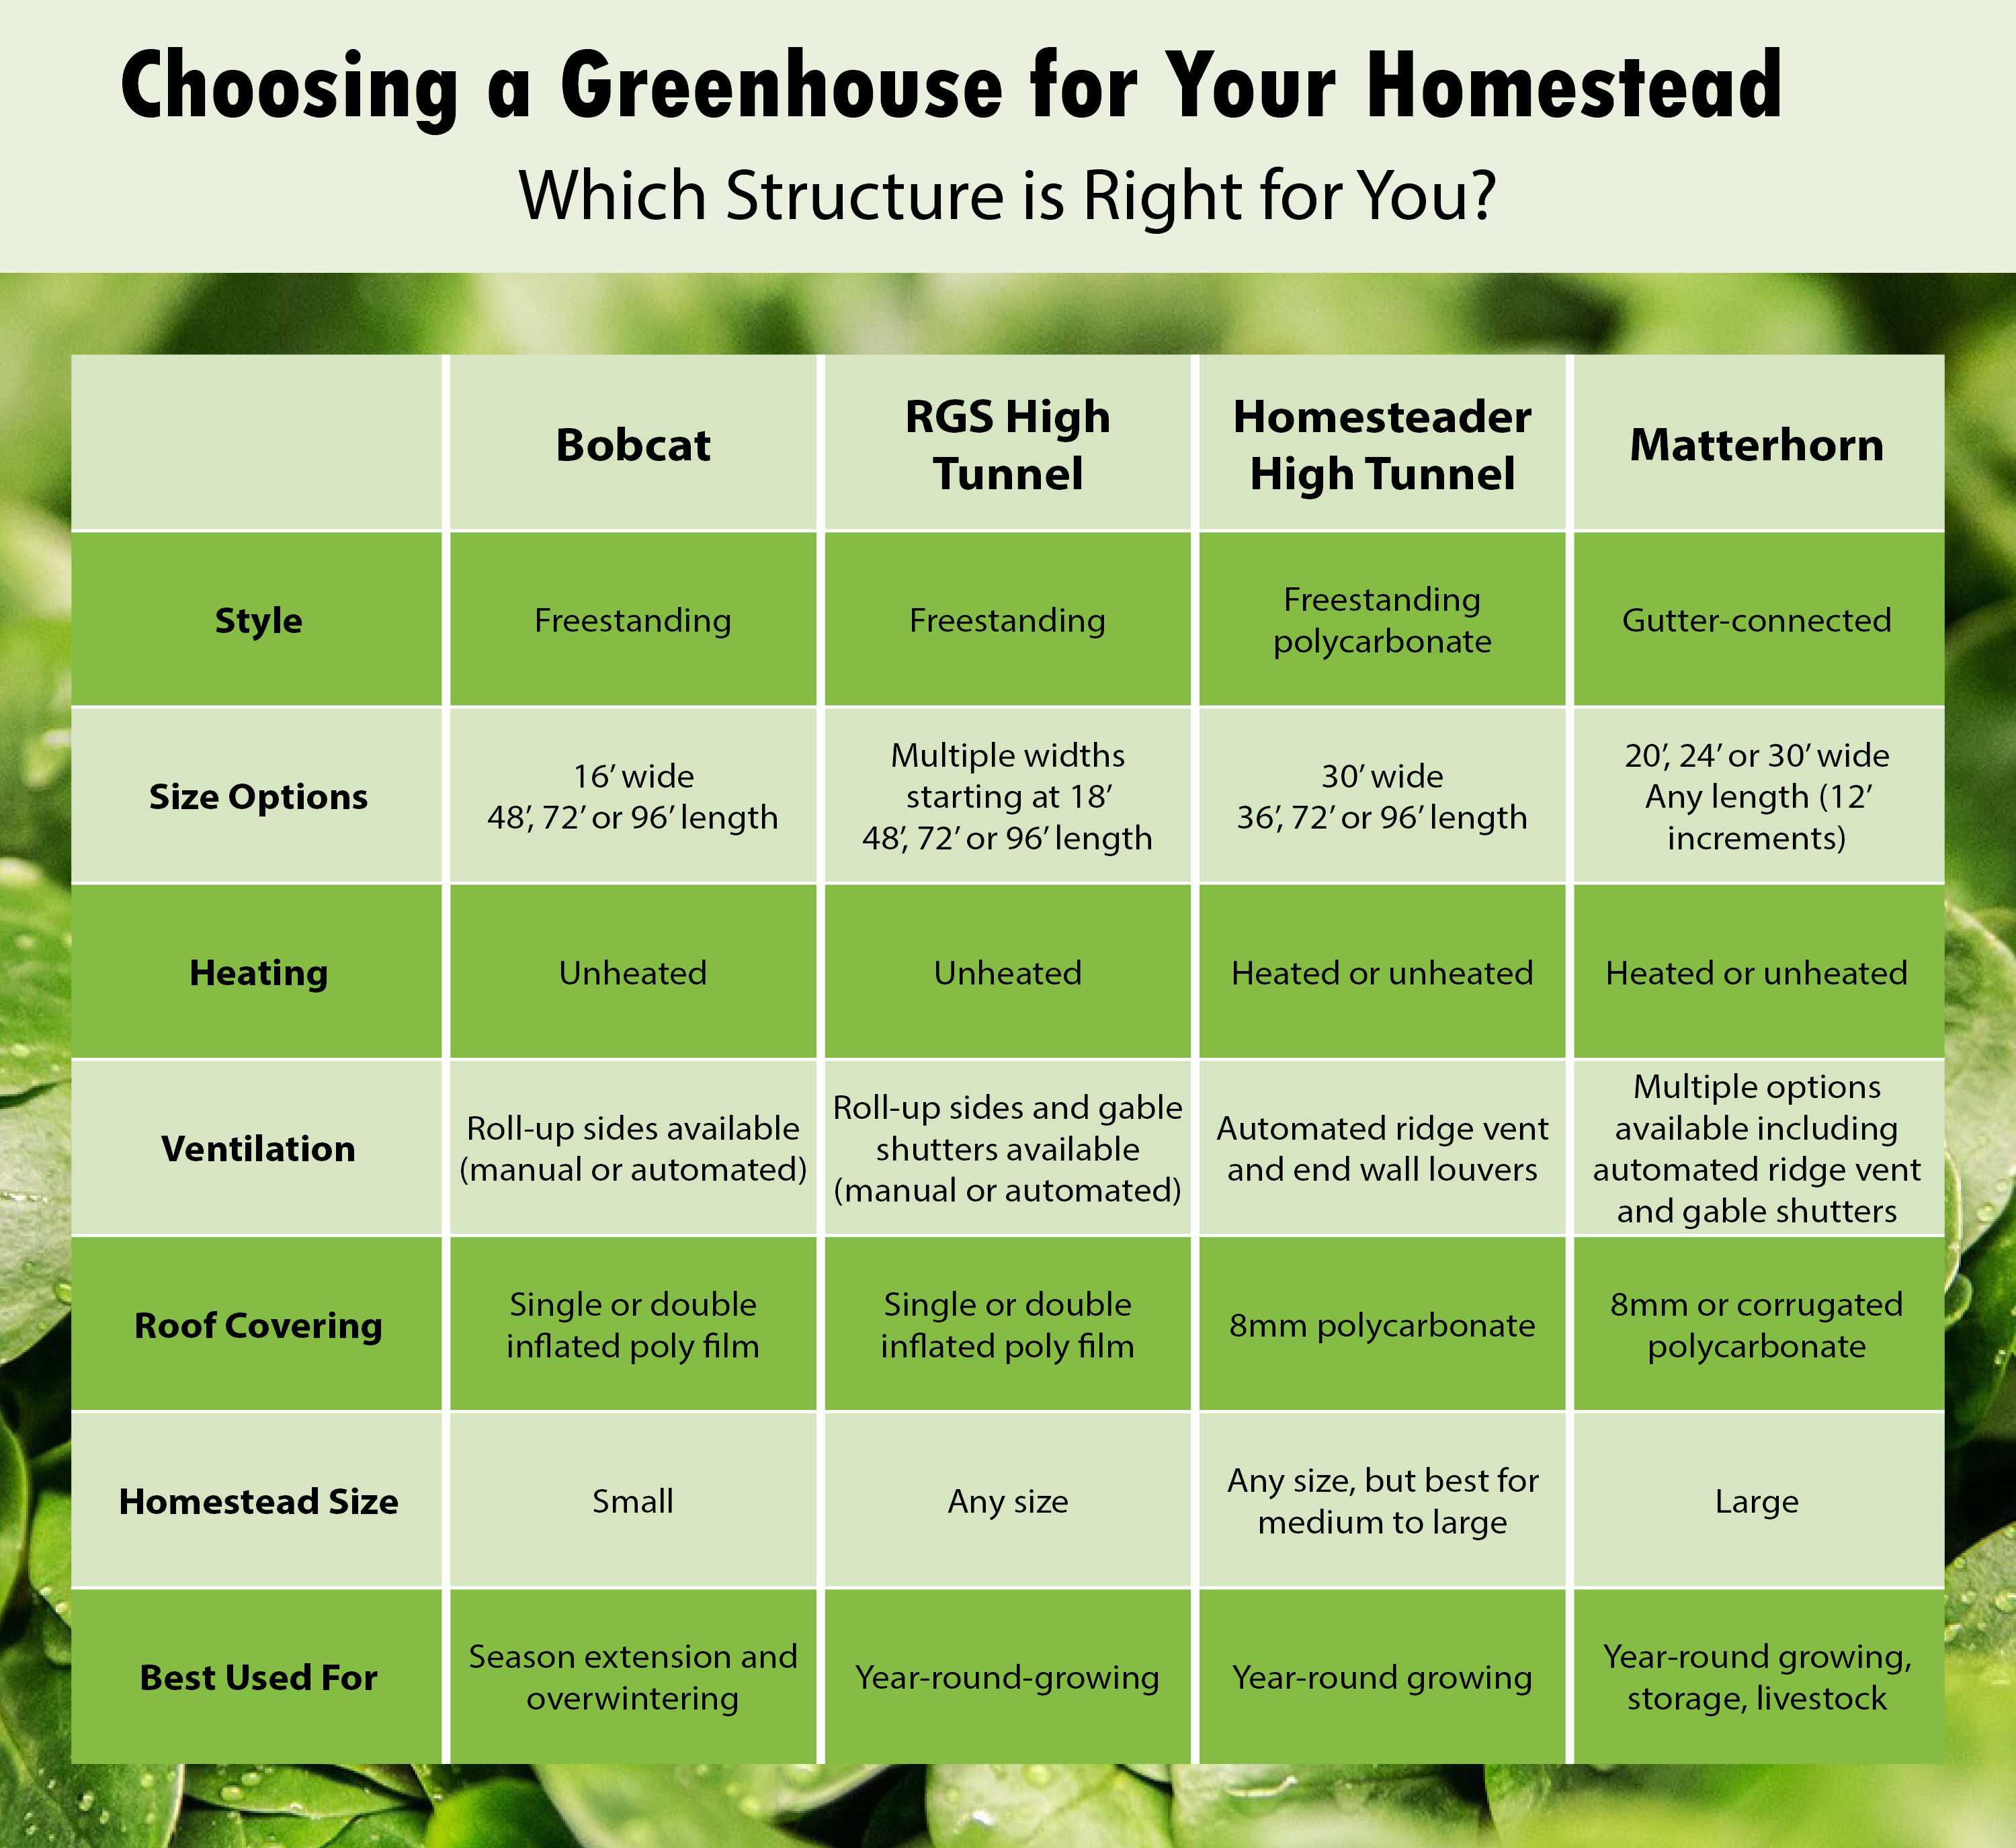 Choosing a Greenhouse for your Homestead